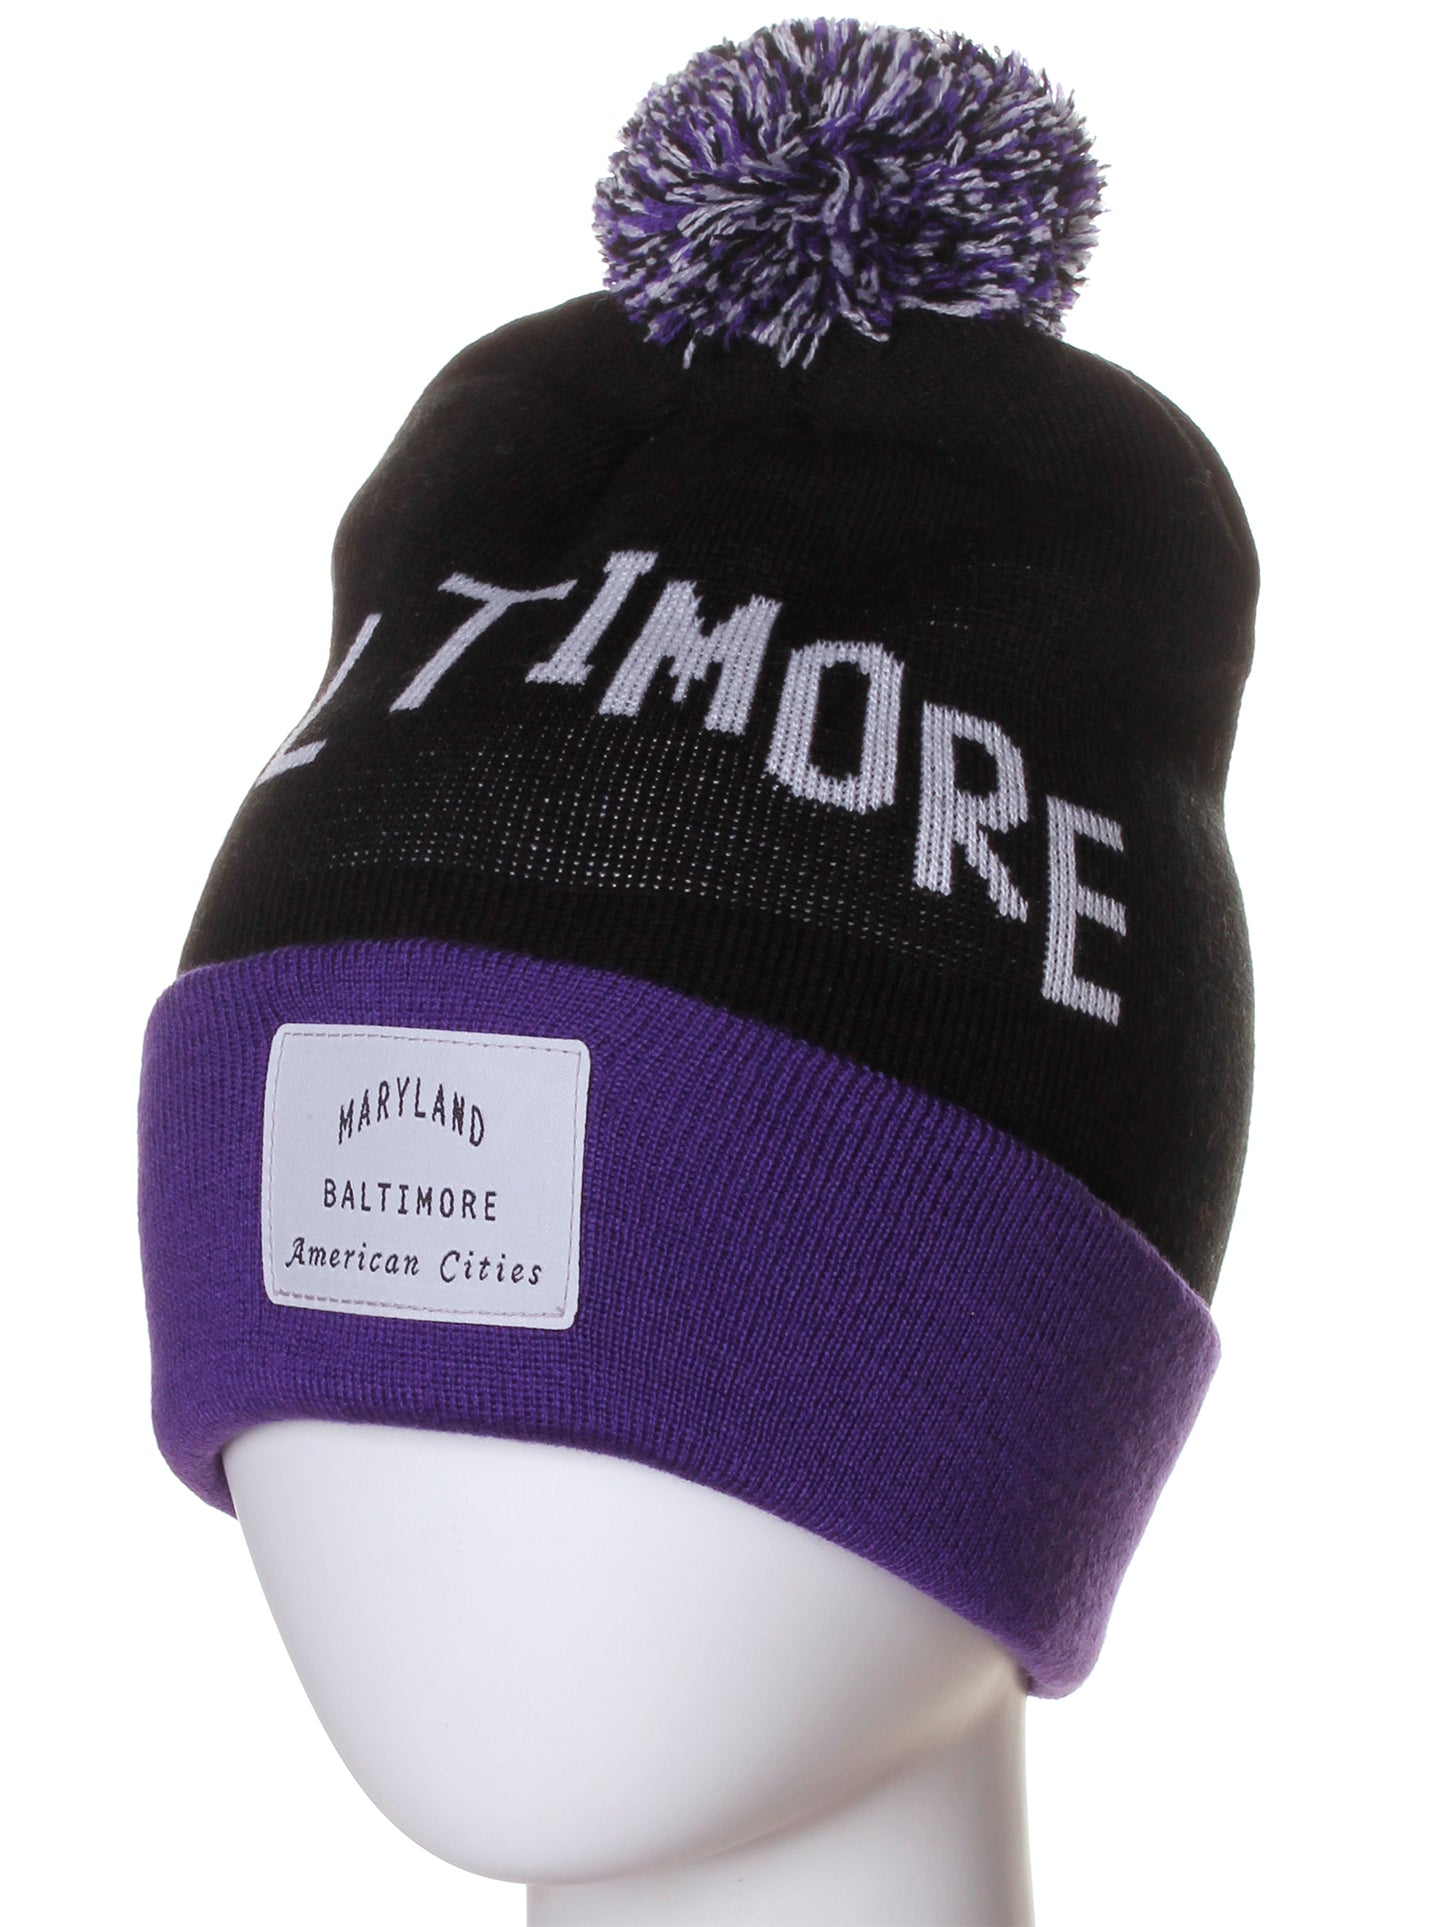 American Cities Baltimore Maryland Arch Letters Pom Pom Knit Hat Cap Beanie